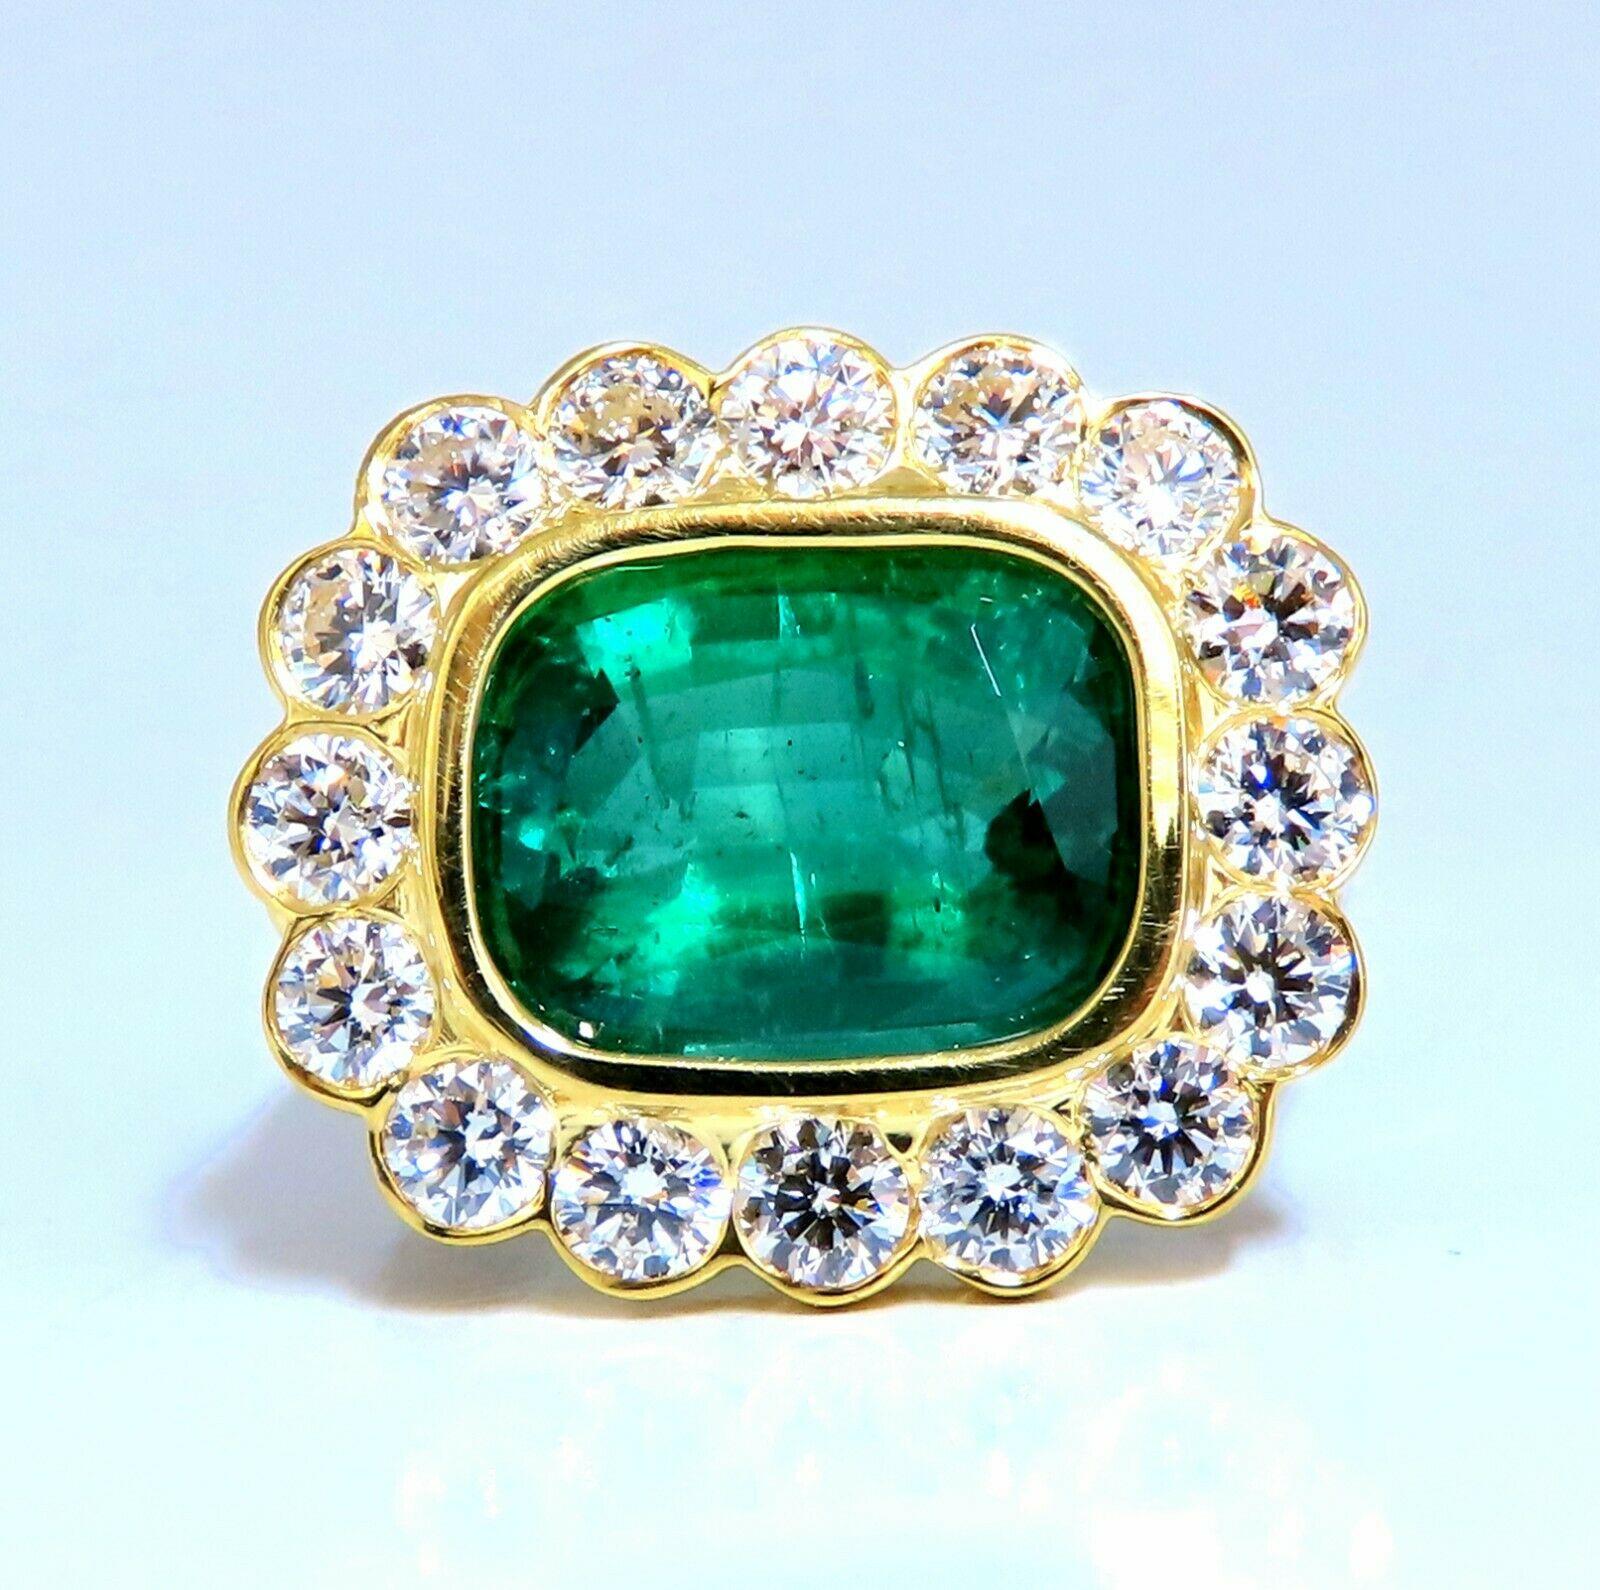 Classic Halo Green / Best Offer

4.70ct. Natural Emerald Ring

GIA Certified: #3355603128(To Accompany)

12.83 X 9.52 x 5.95mm

Full cut Emerald Cut brilliant Clean Clarity & Transparent

(F2) Vivid Green / Zambia Best

1.80ct. Diamonds.

Round &